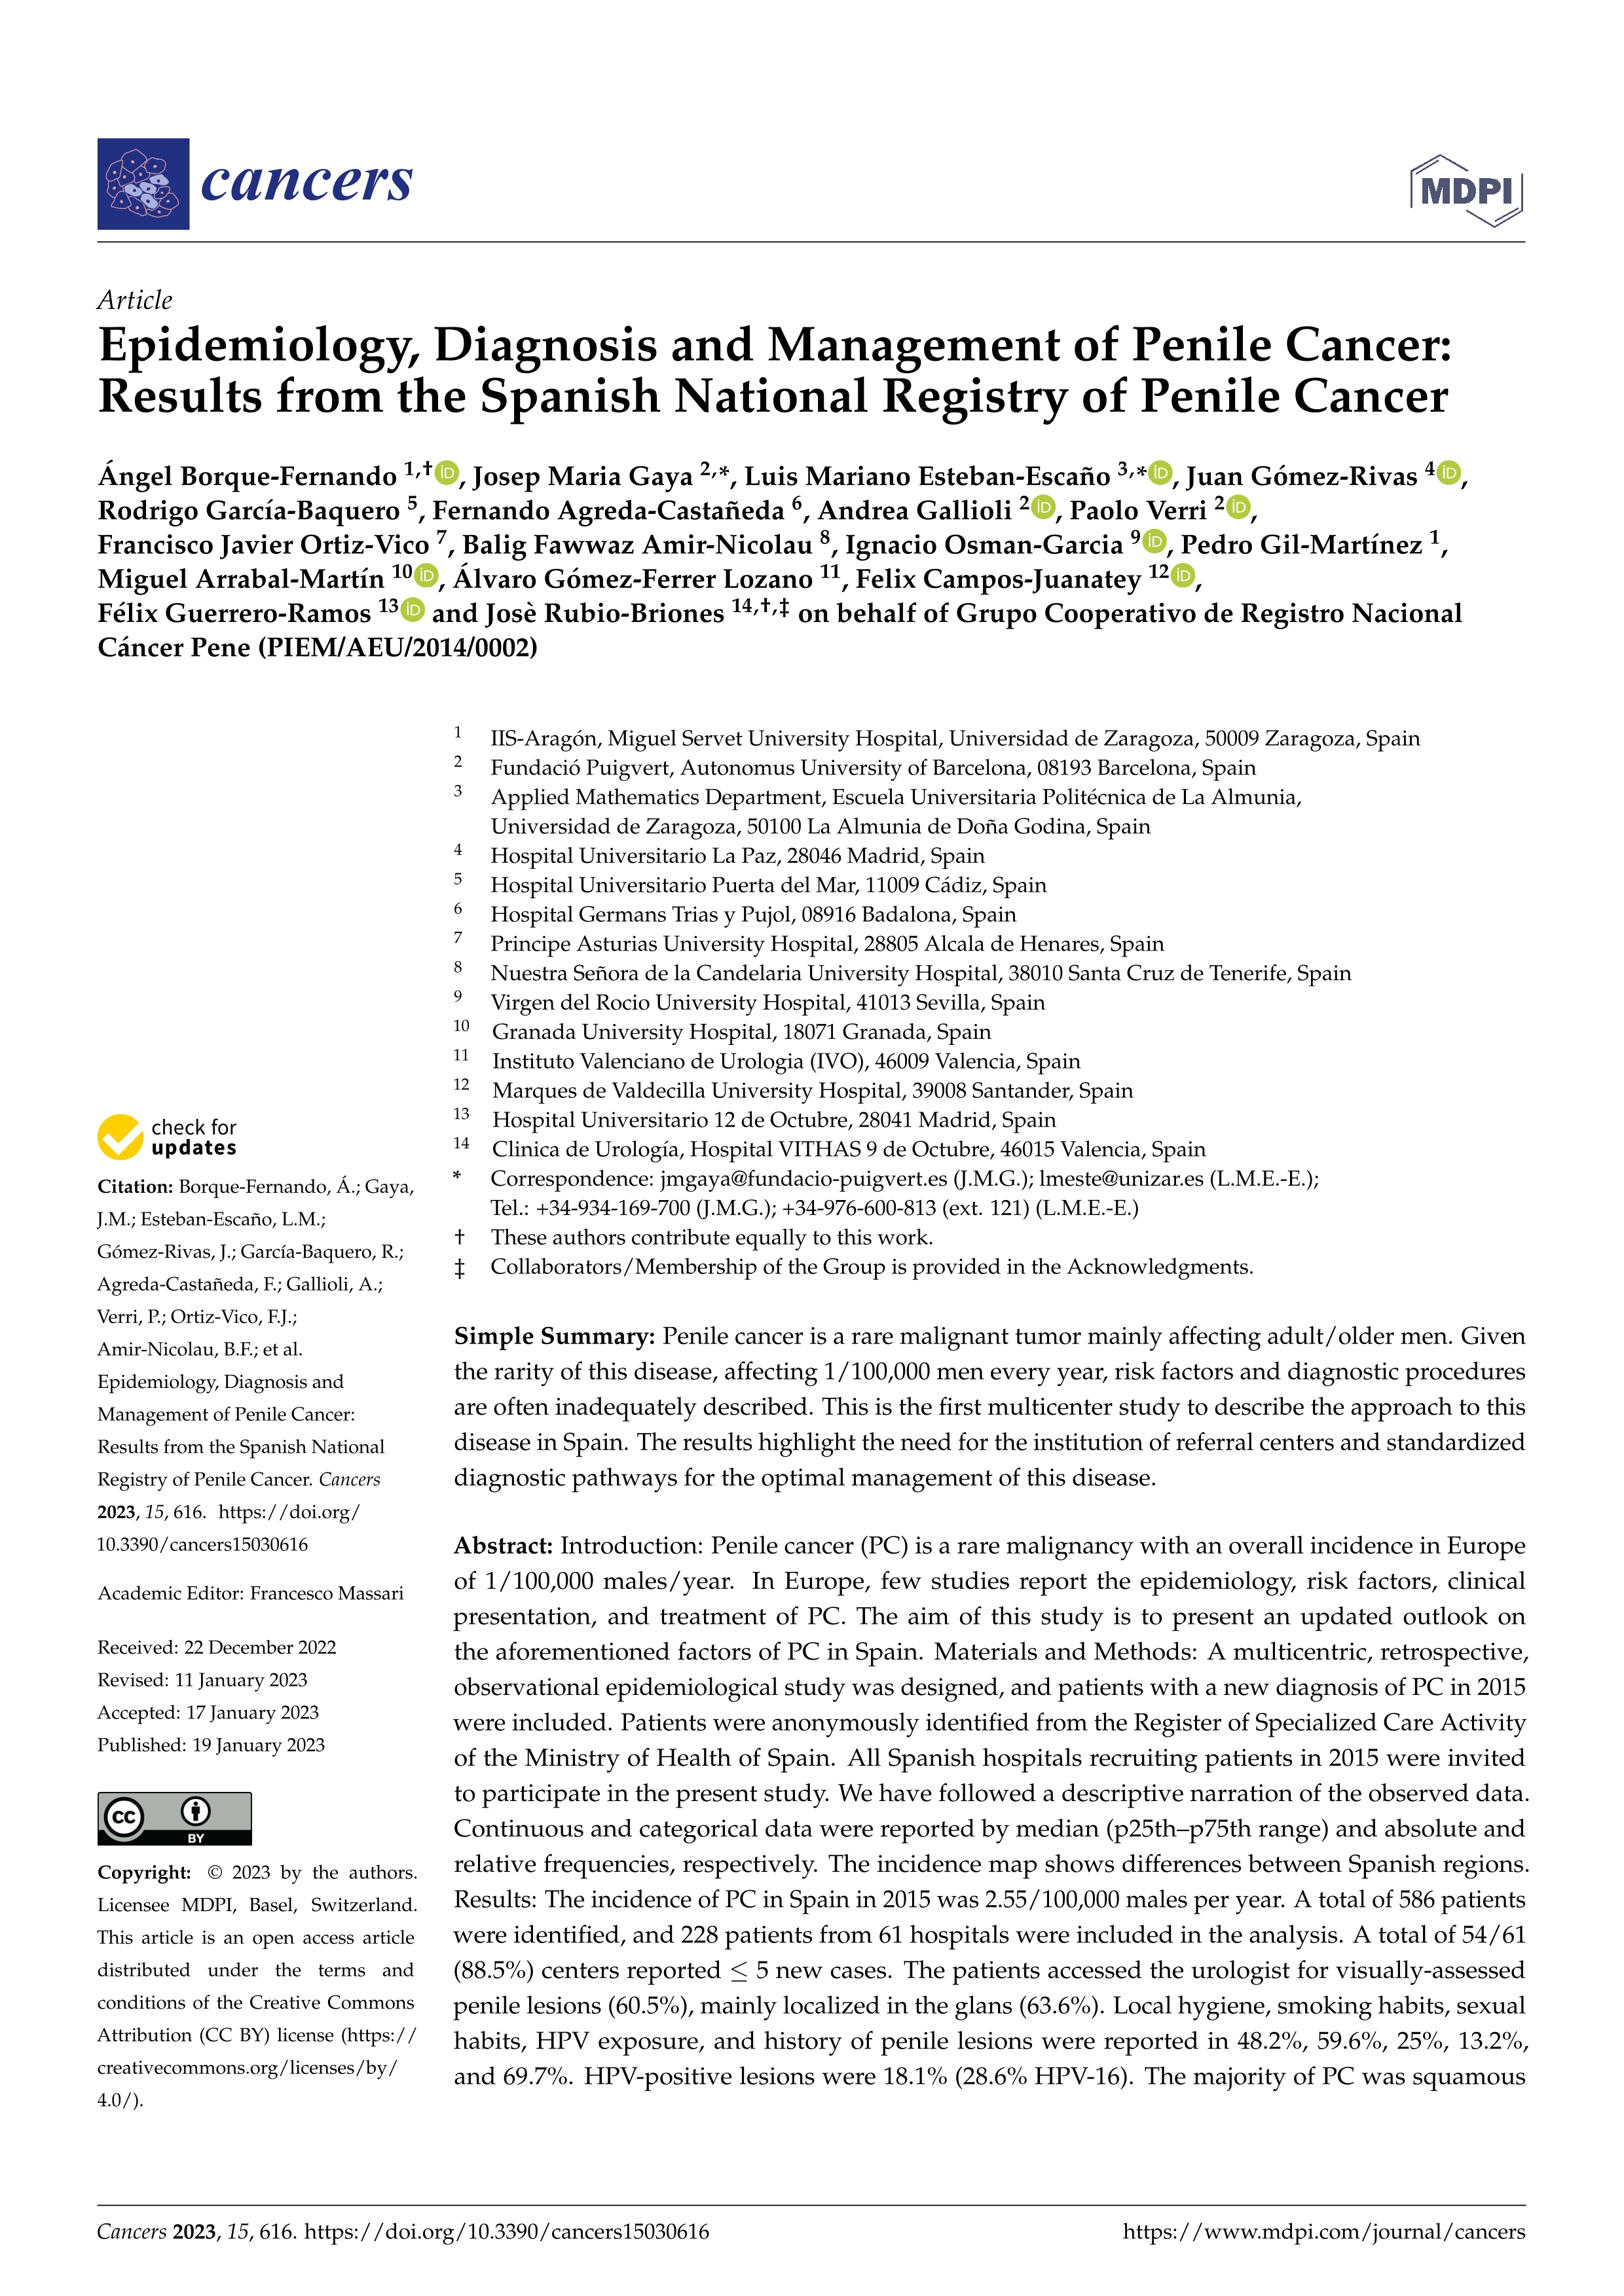 Epidemiology, Diagnosis and Management of Penile Cancer: Results from the Spanish National Registry of Penile Cancer